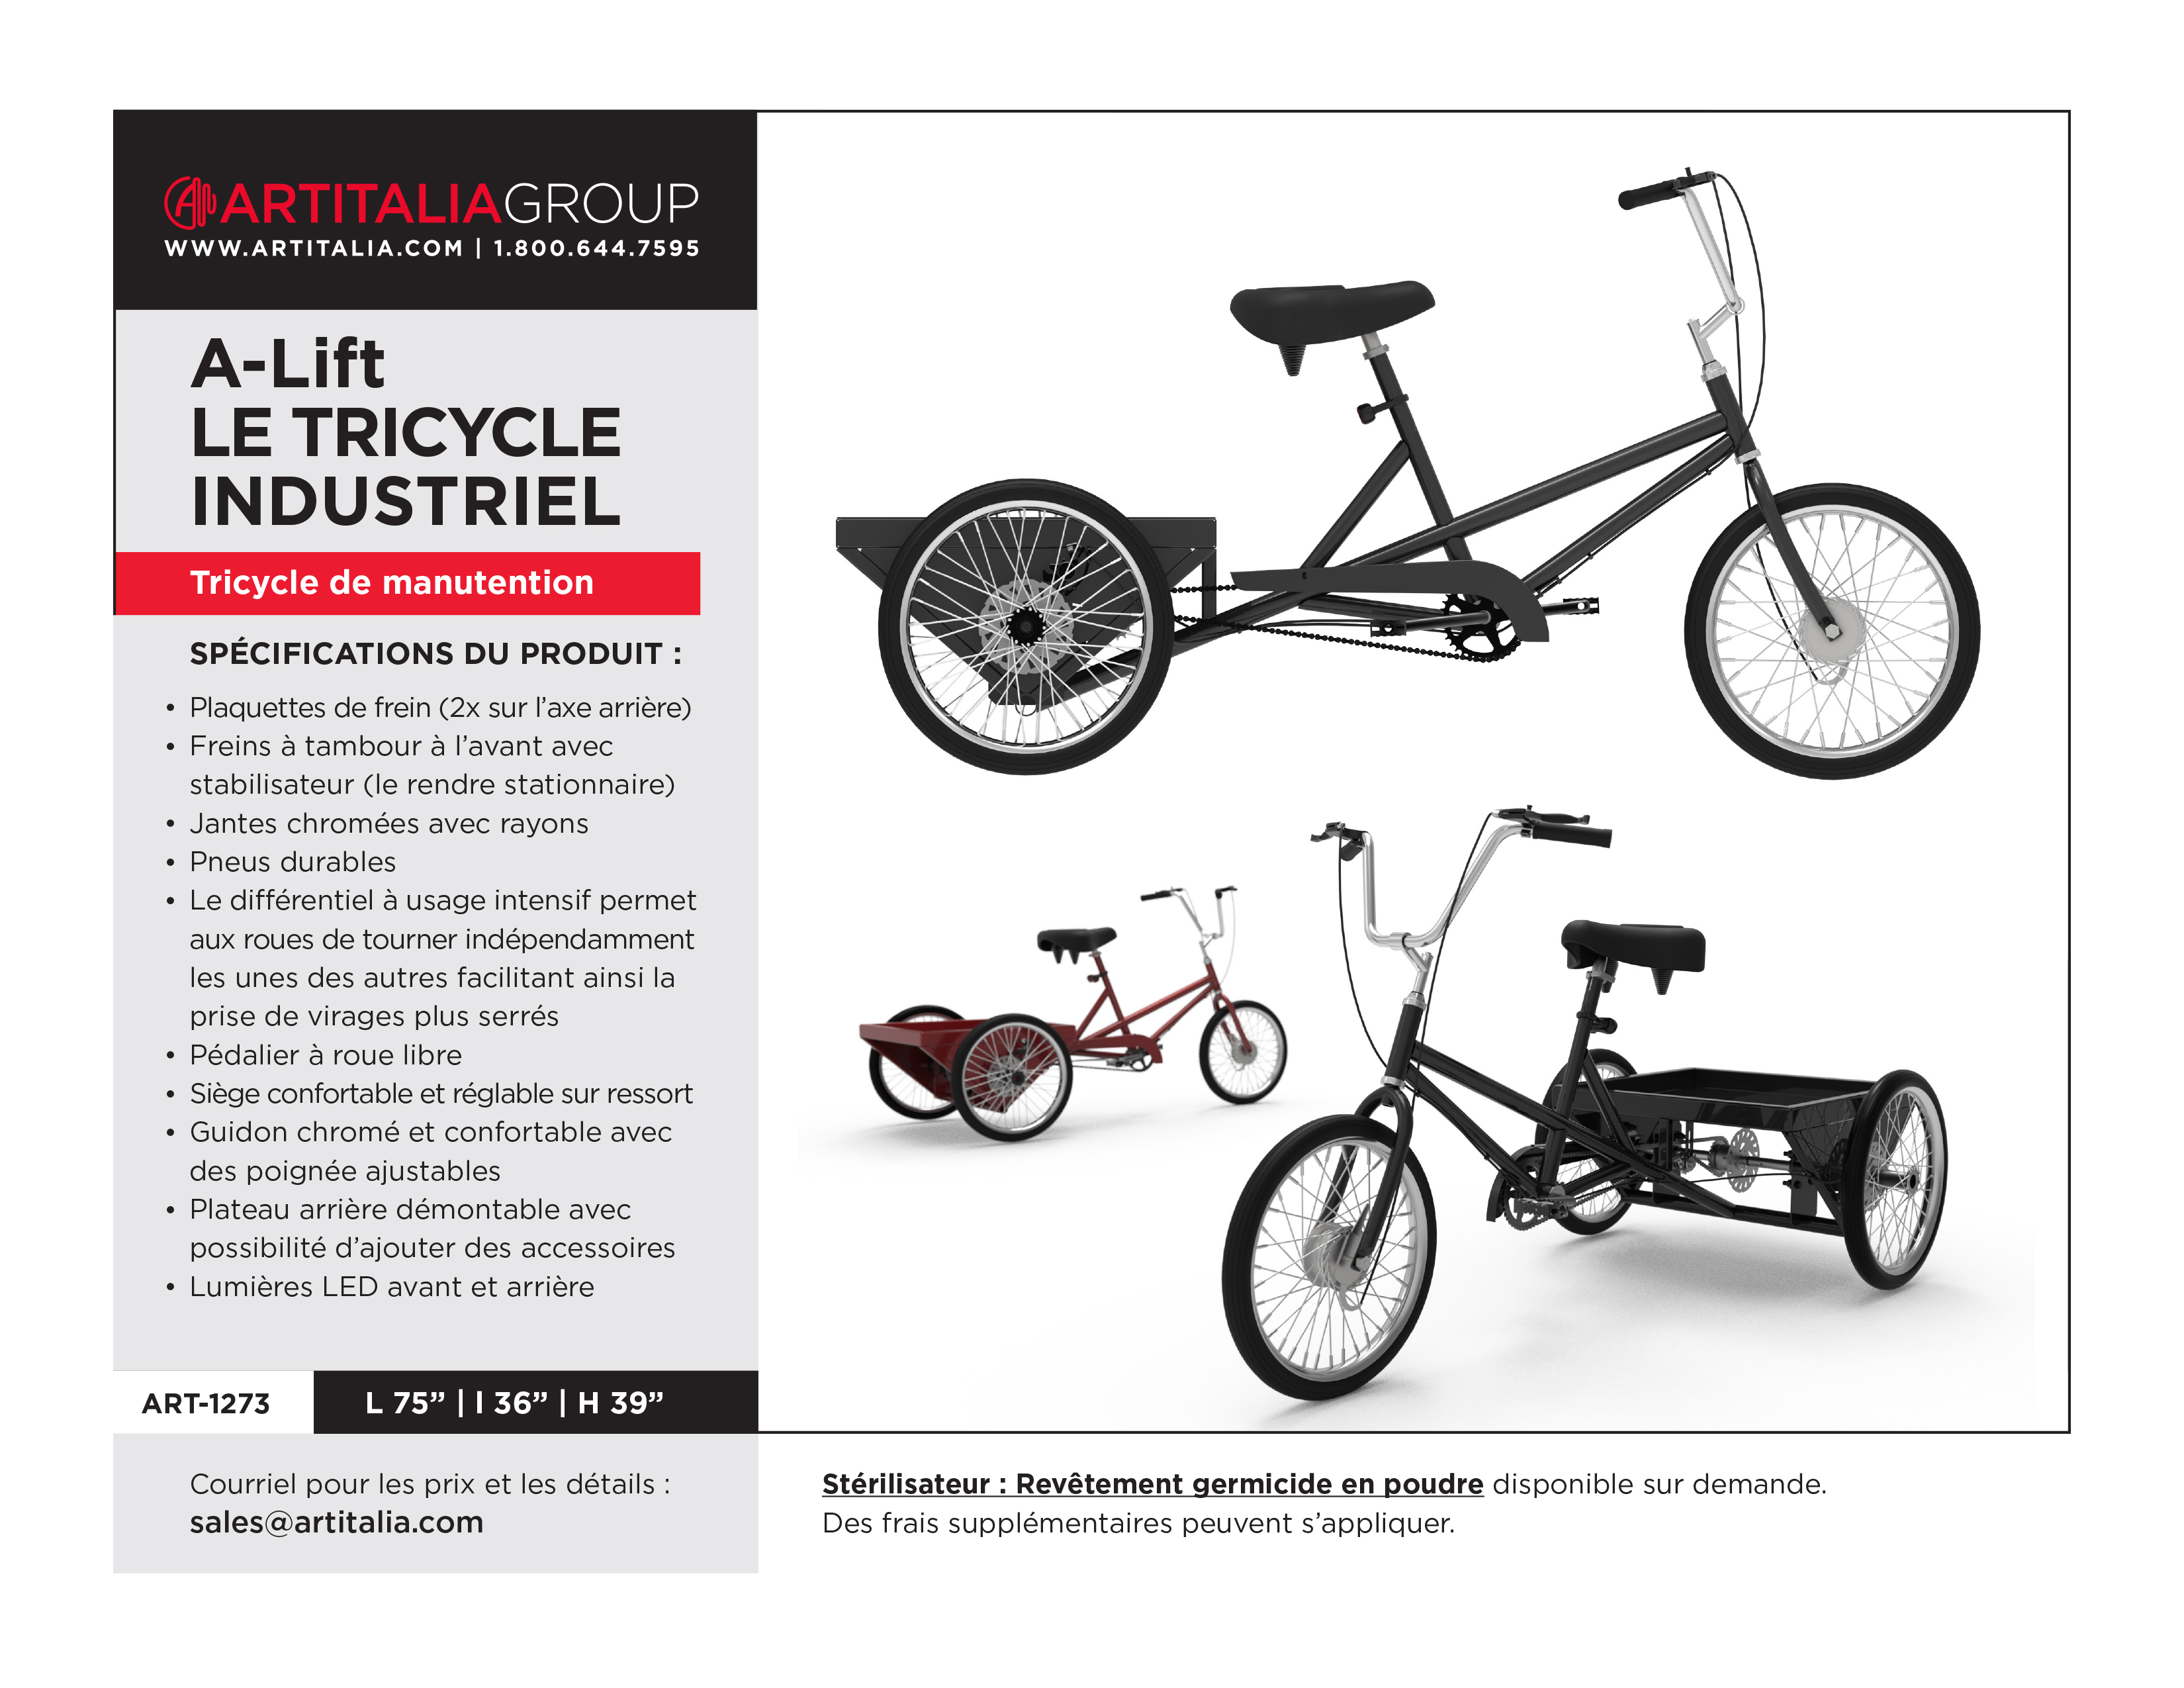 A-Lift Material Handling Tricycle - Material Handling - Material Handling Solutions - Material Handling Equipment